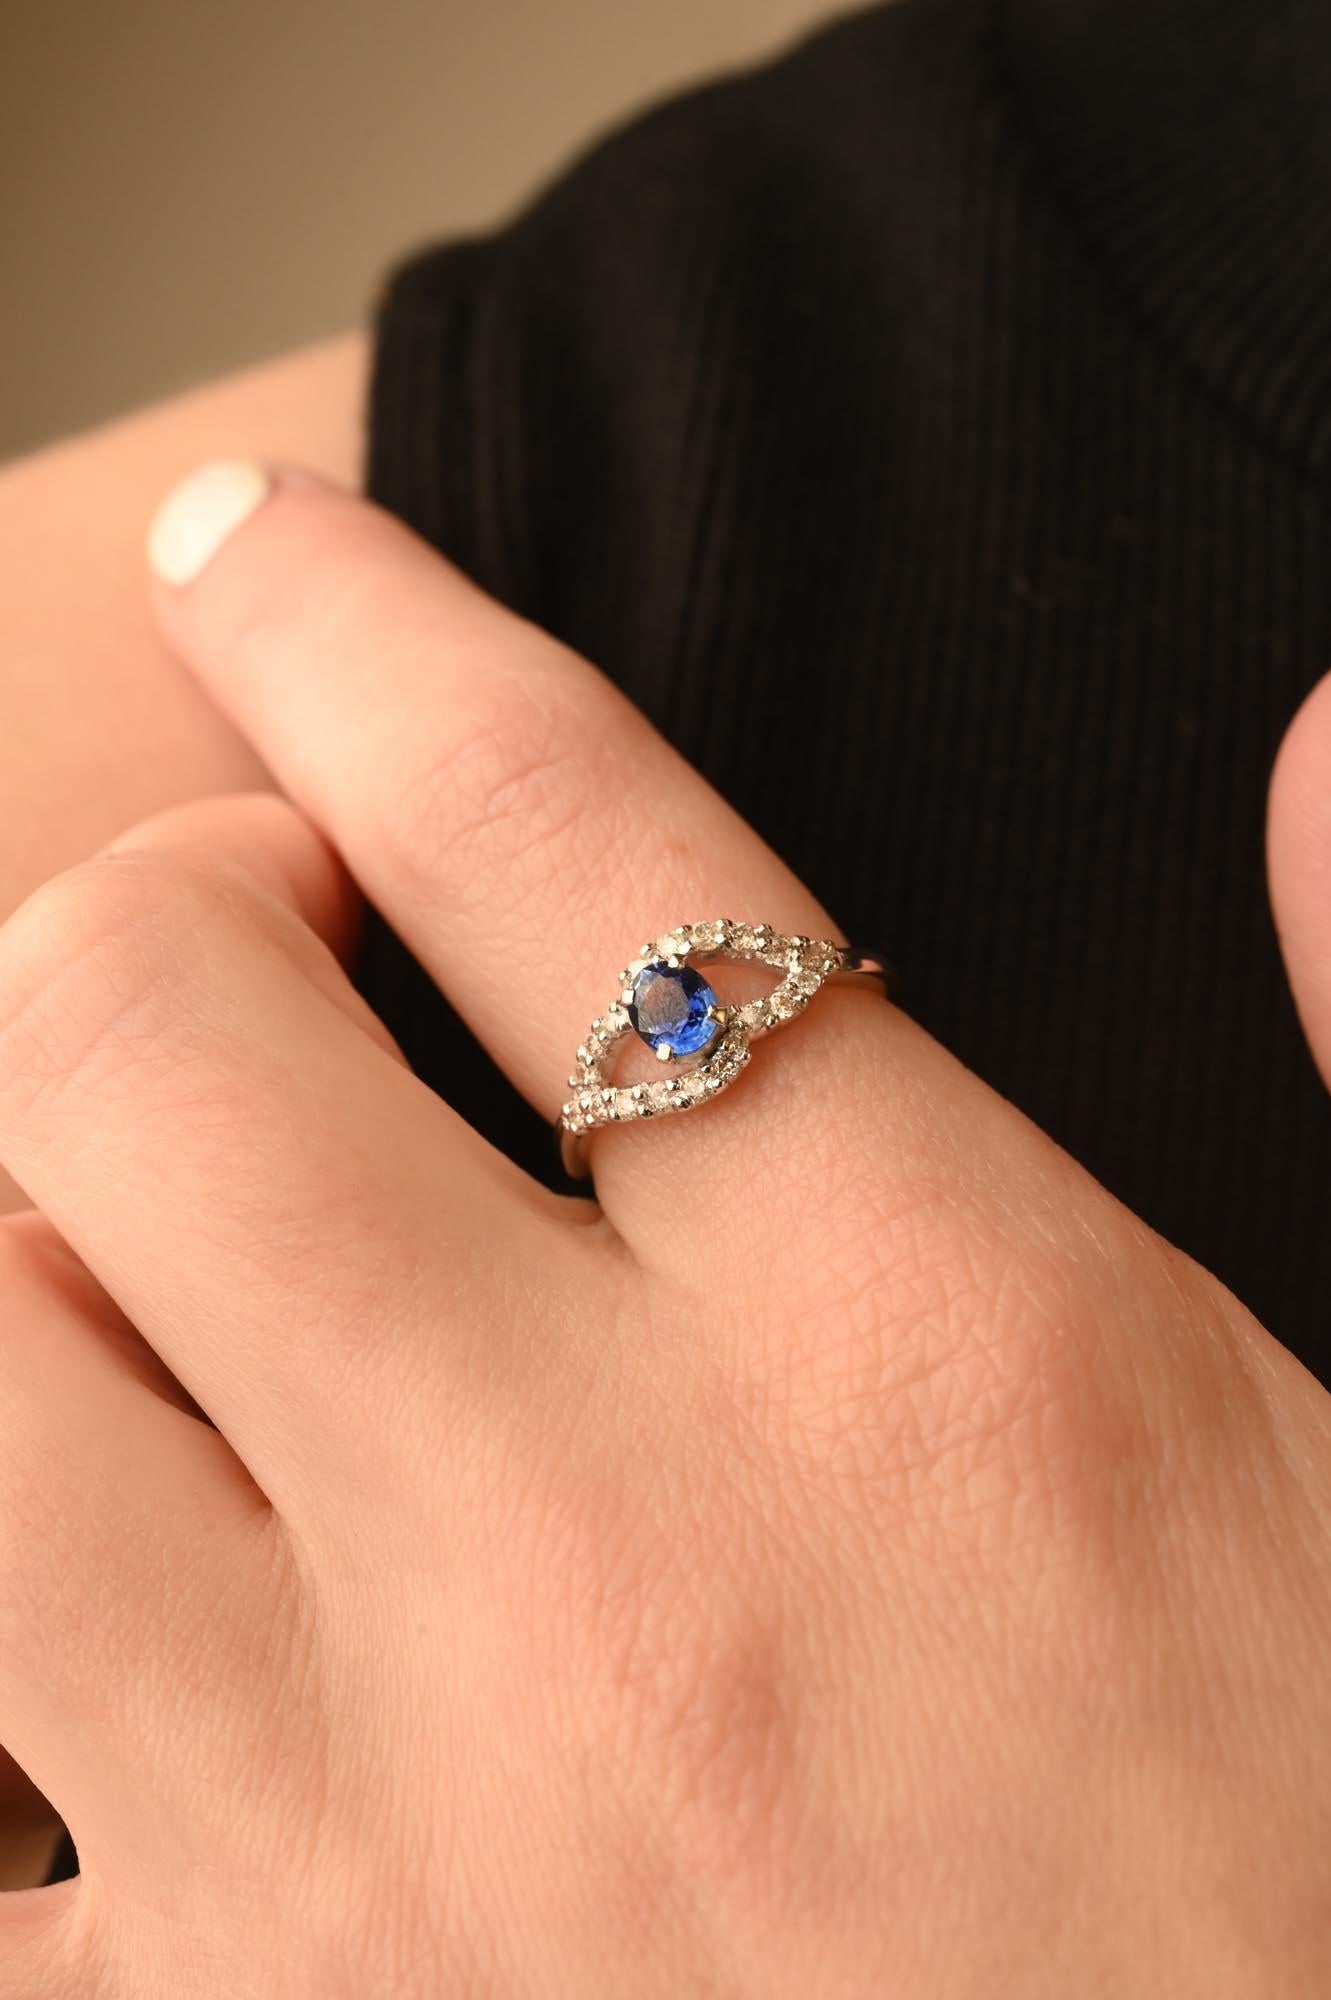 For Sale:  Alluring Blue Sapphire Ring with Diamonds Set in 14K Solid White Gold 4